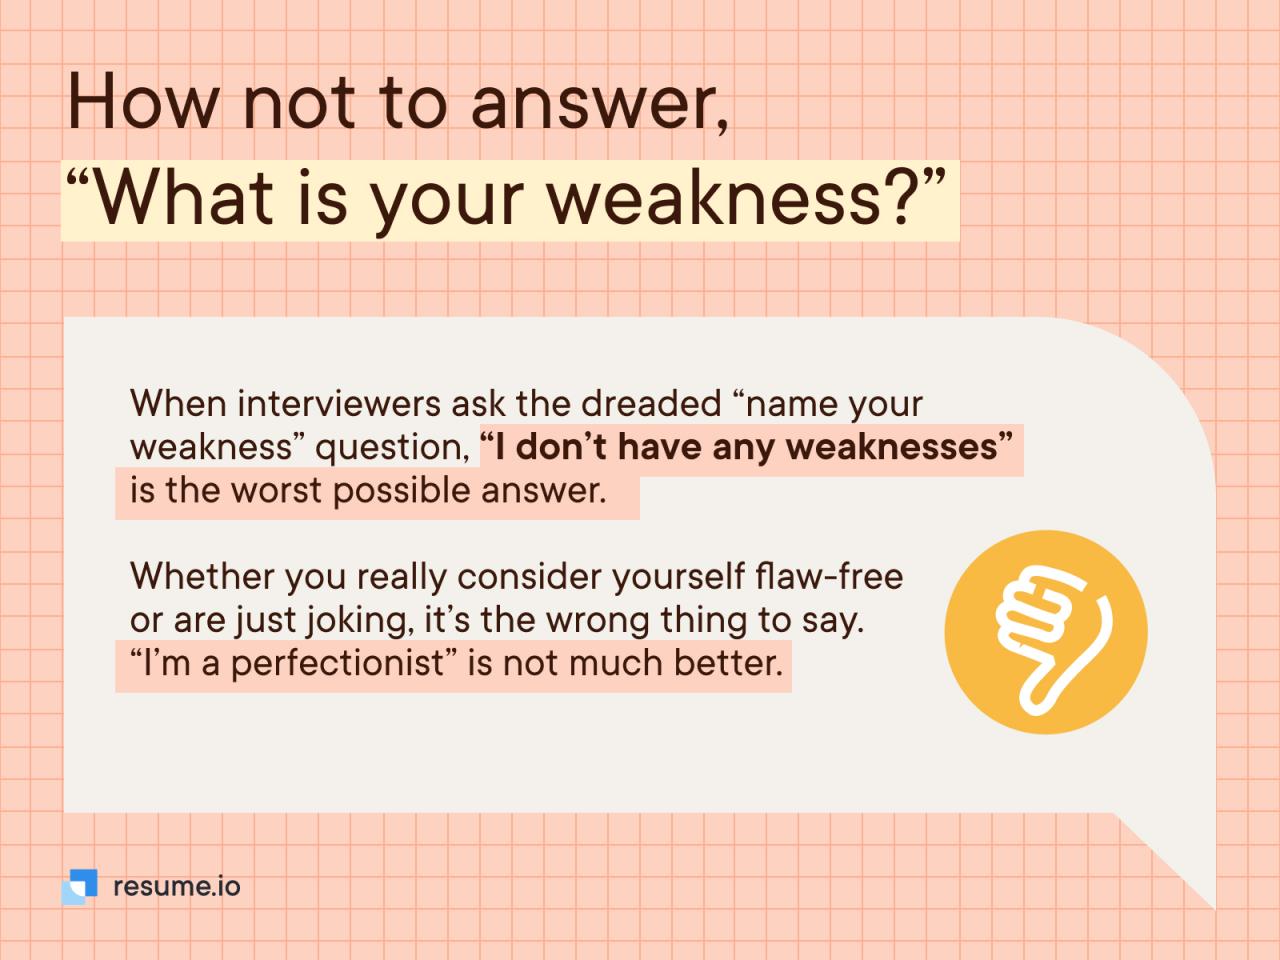 How do you answer your weakness in an interview